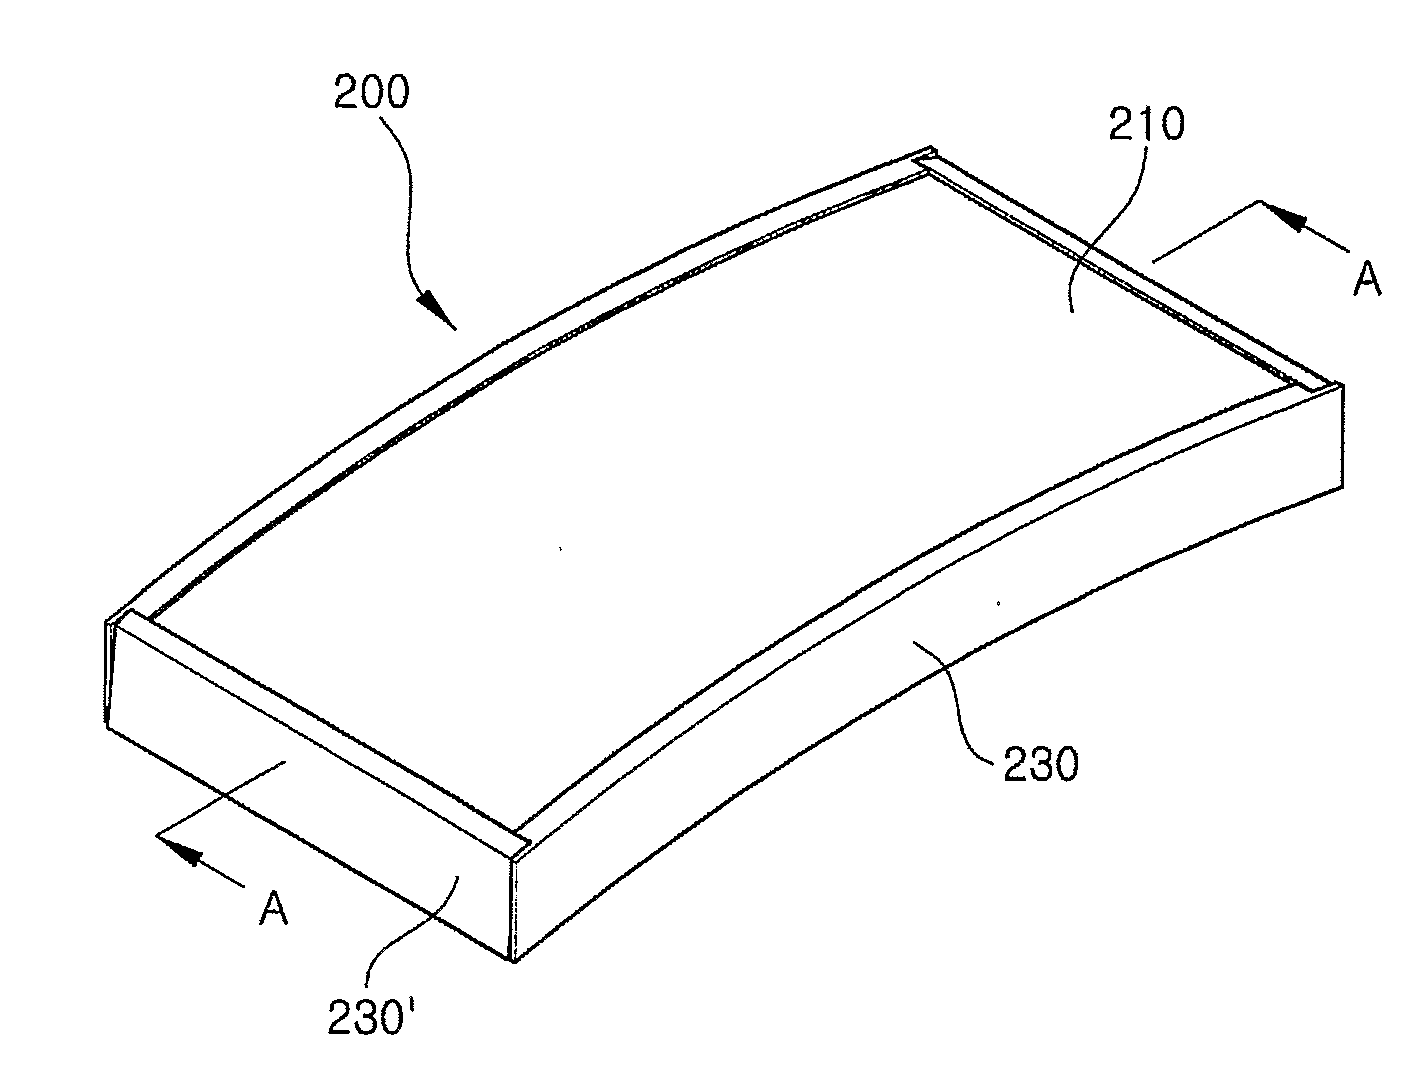 Curved Panel for Acoustical Shell, Method of Manufacturing the Same, and Acoustical Shell Using the Same